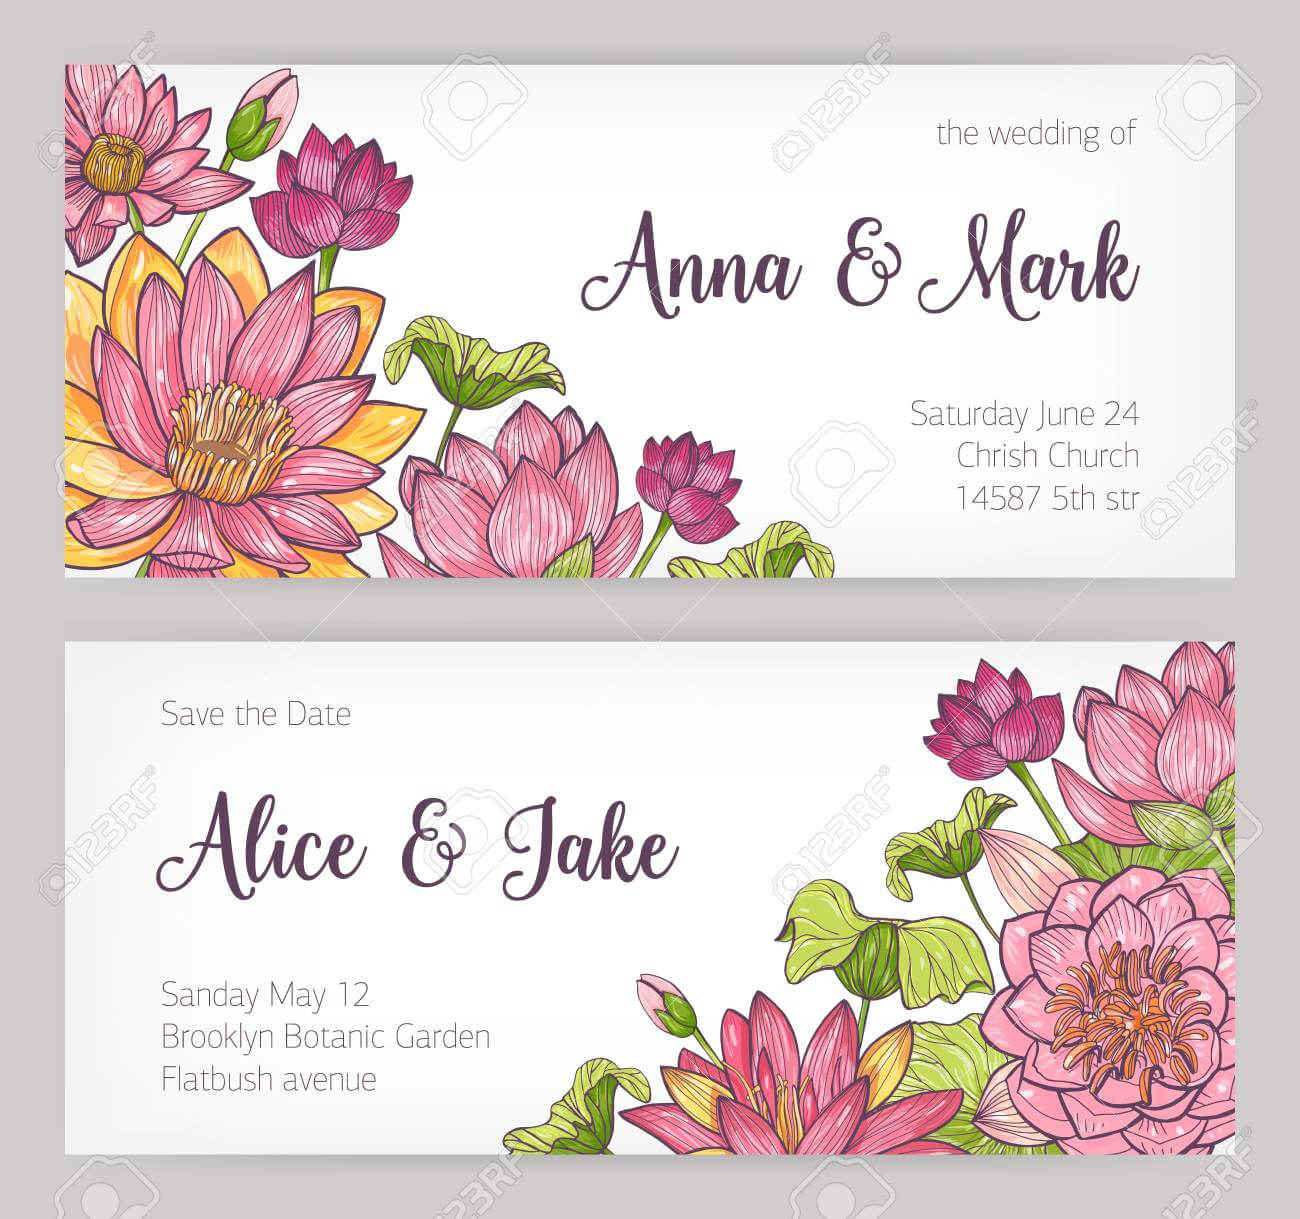 Wedding Invitation And Save The Date Card Templates Decorated.. Pertaining To Save The Date Cards Templates